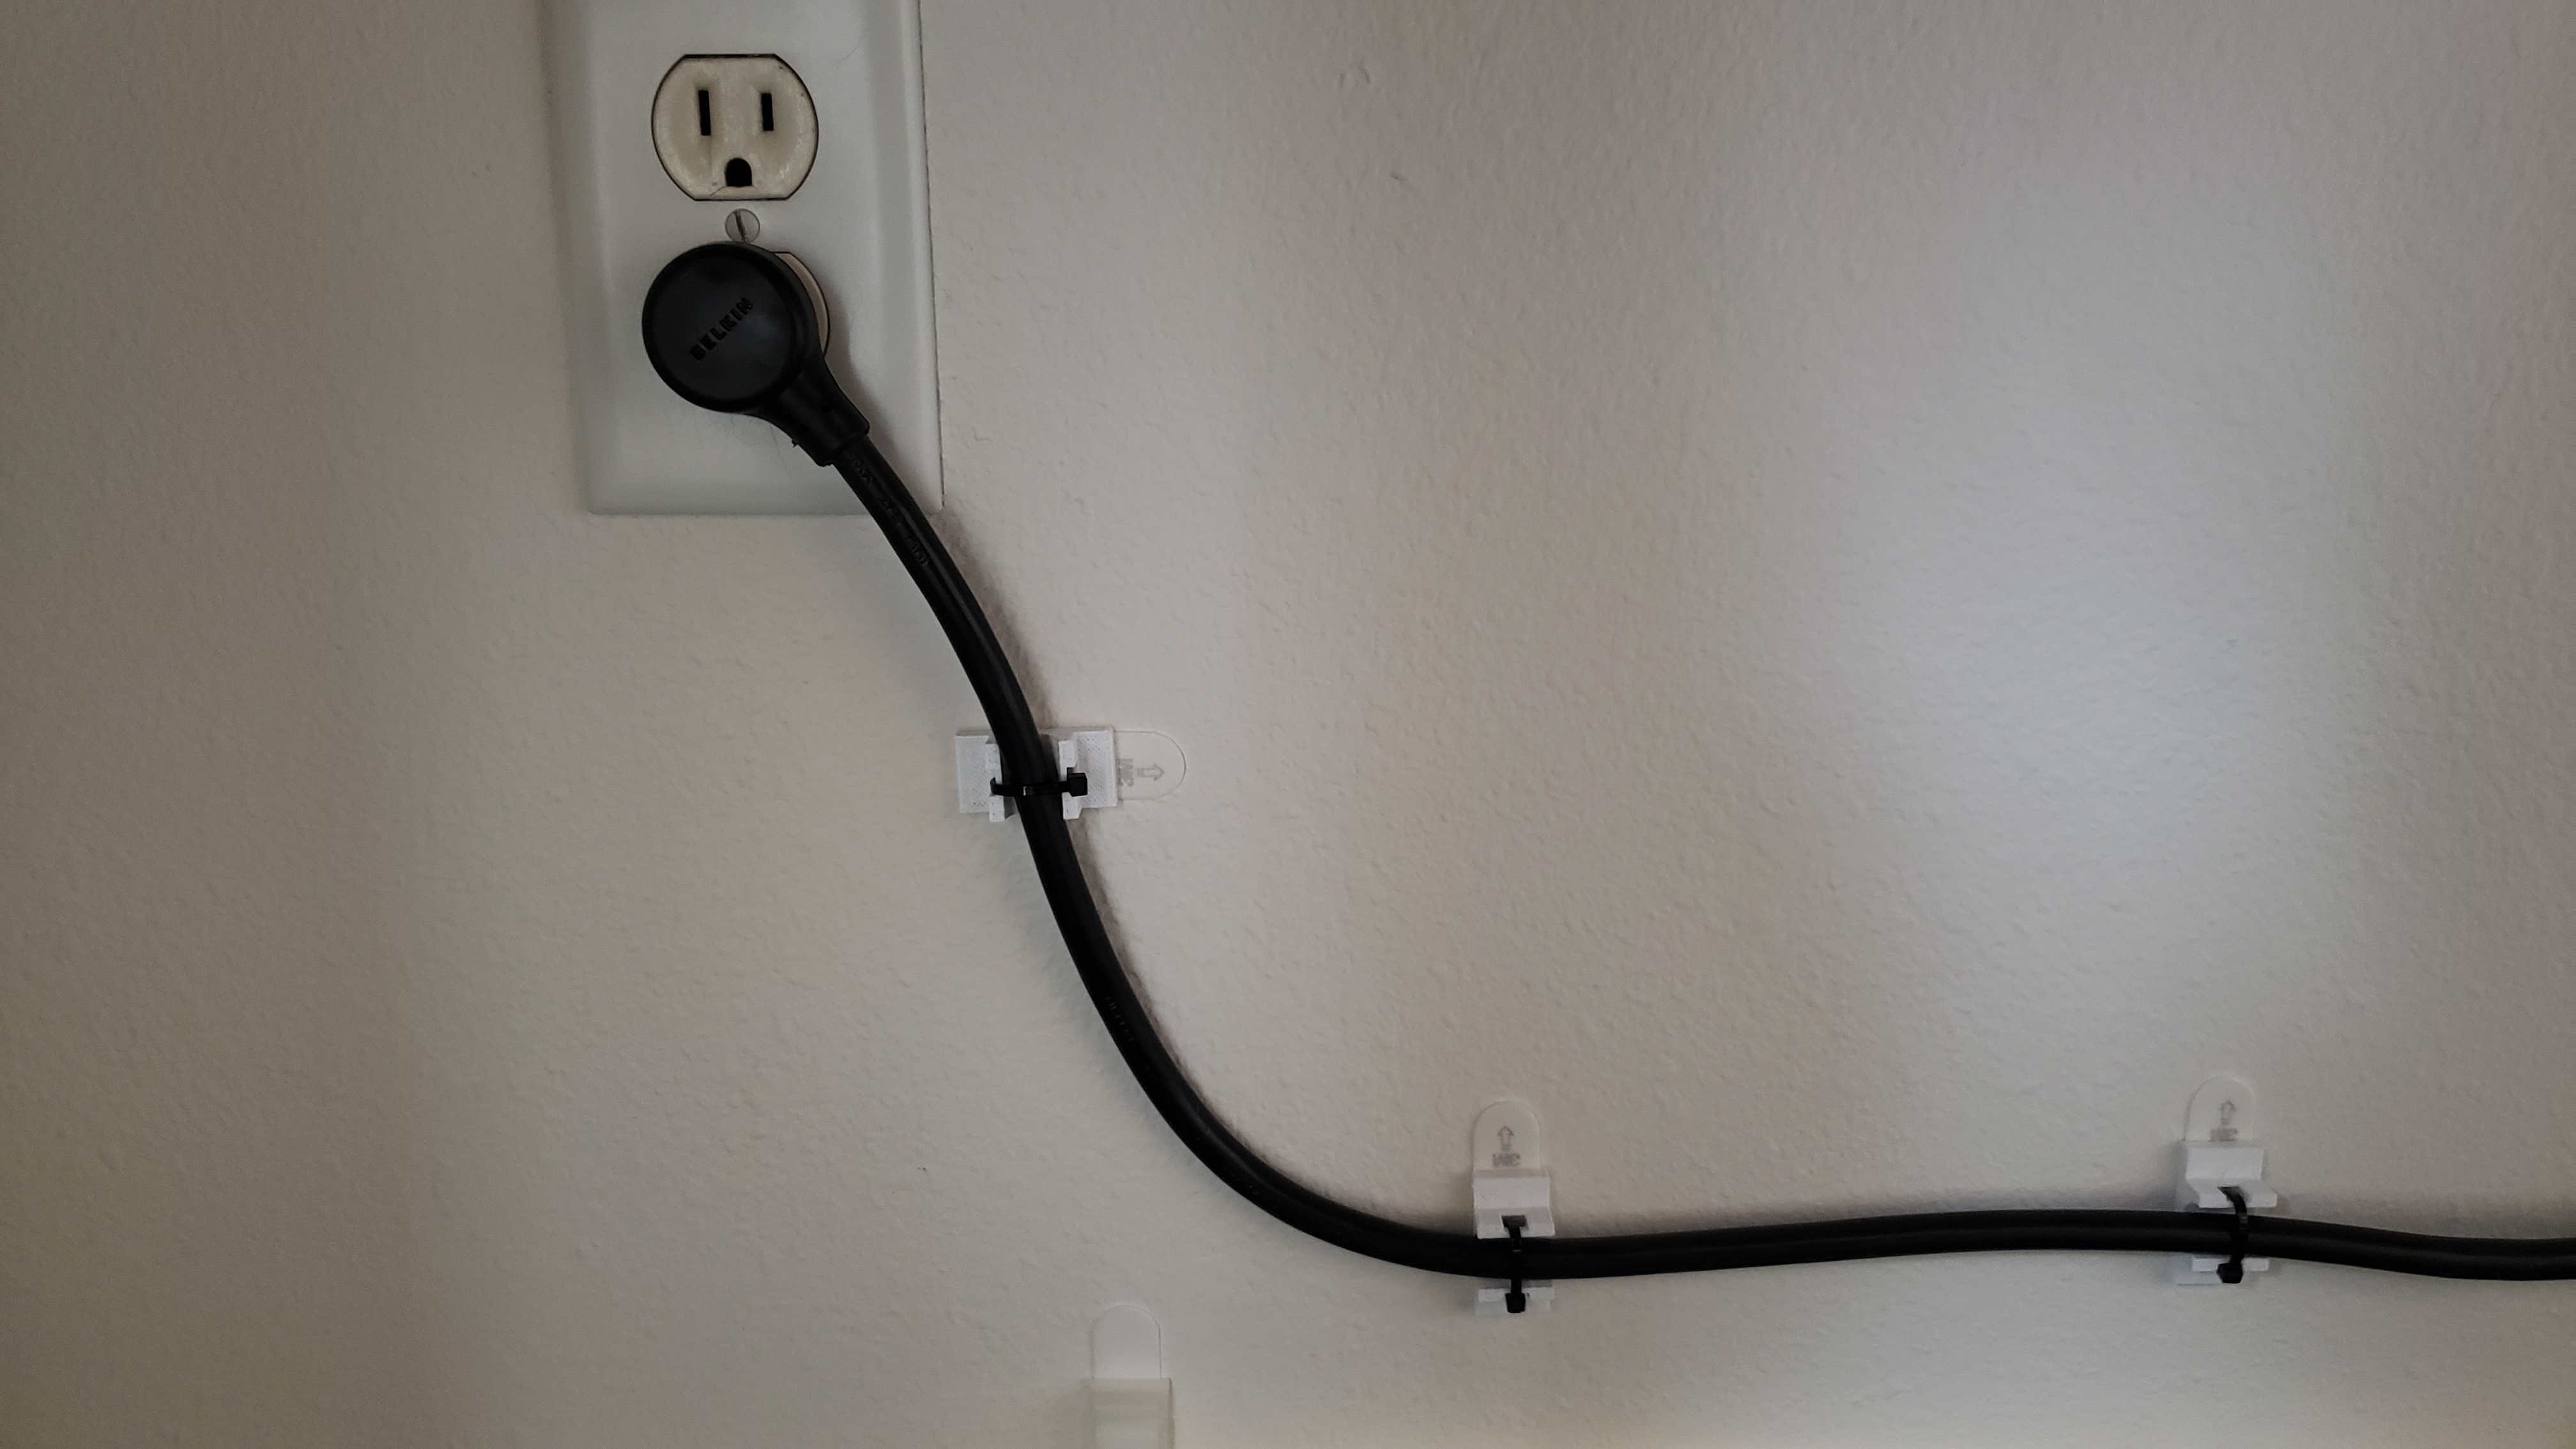 Command Strip Zip-Tie Holder for Power Cable